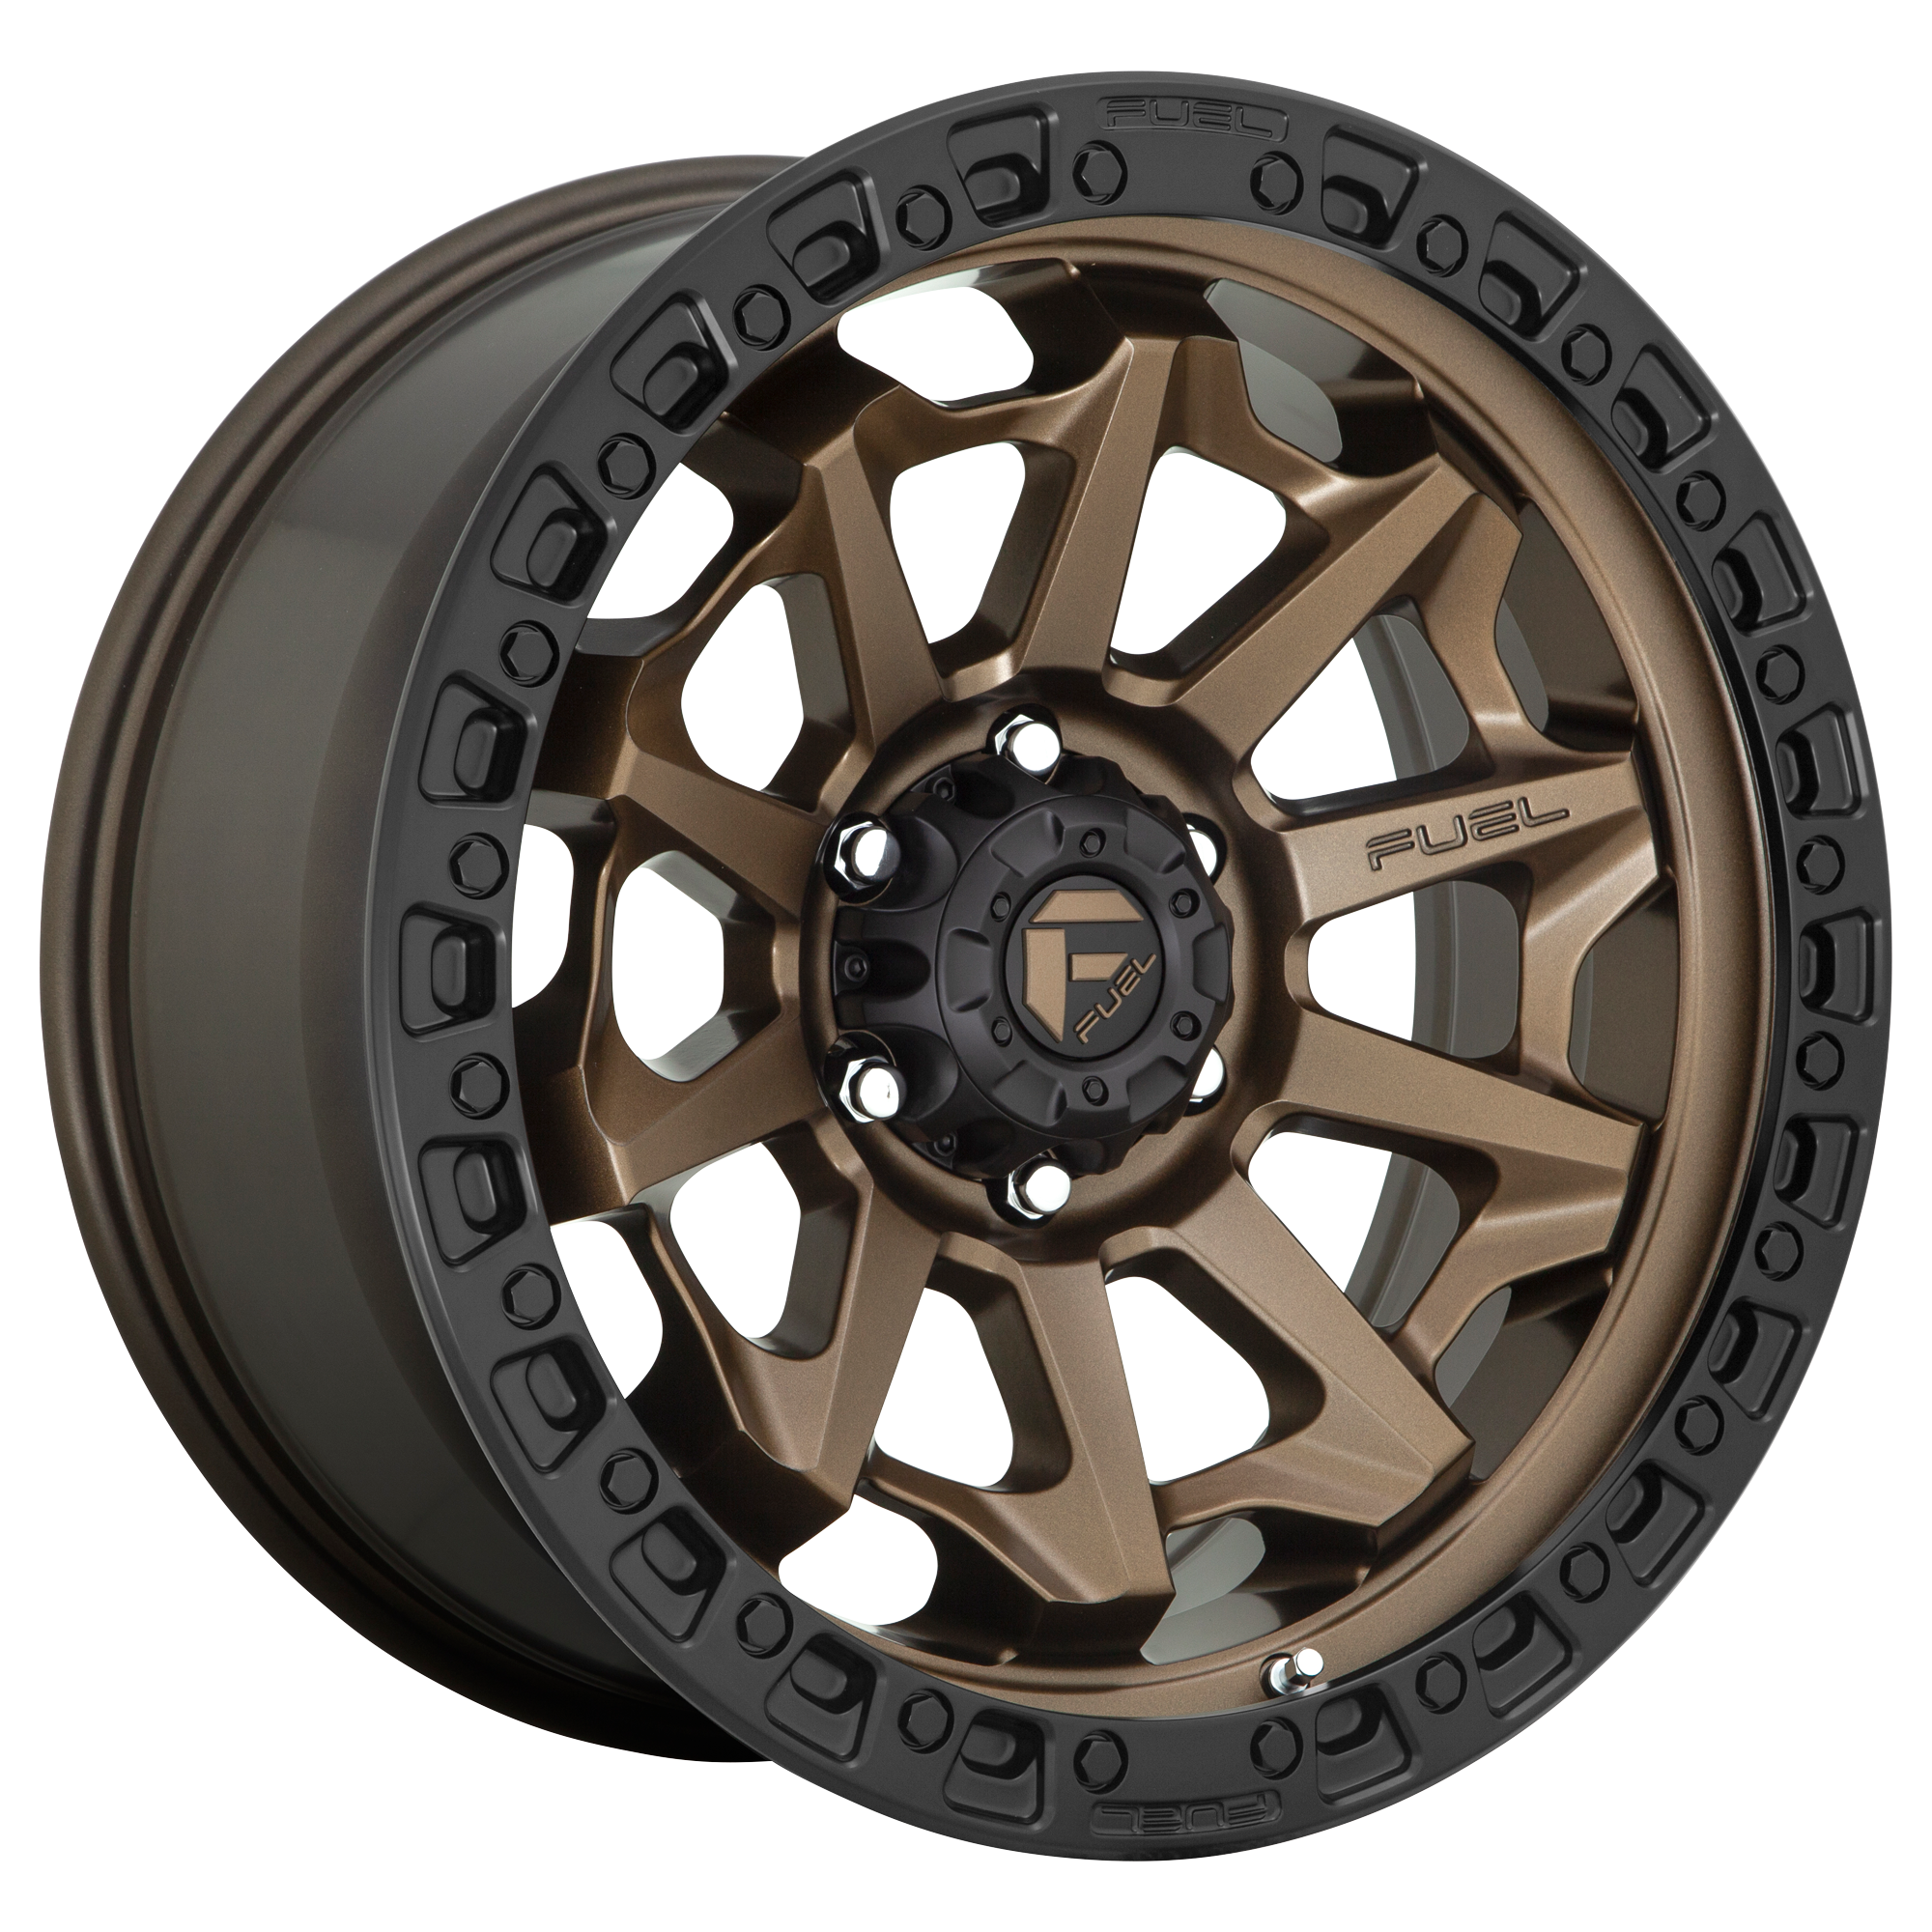 COVERT 17x9 8x165.10 MATTE BRONZE BLACK BEAD RING (1 mm) - Tires and Engine Performance